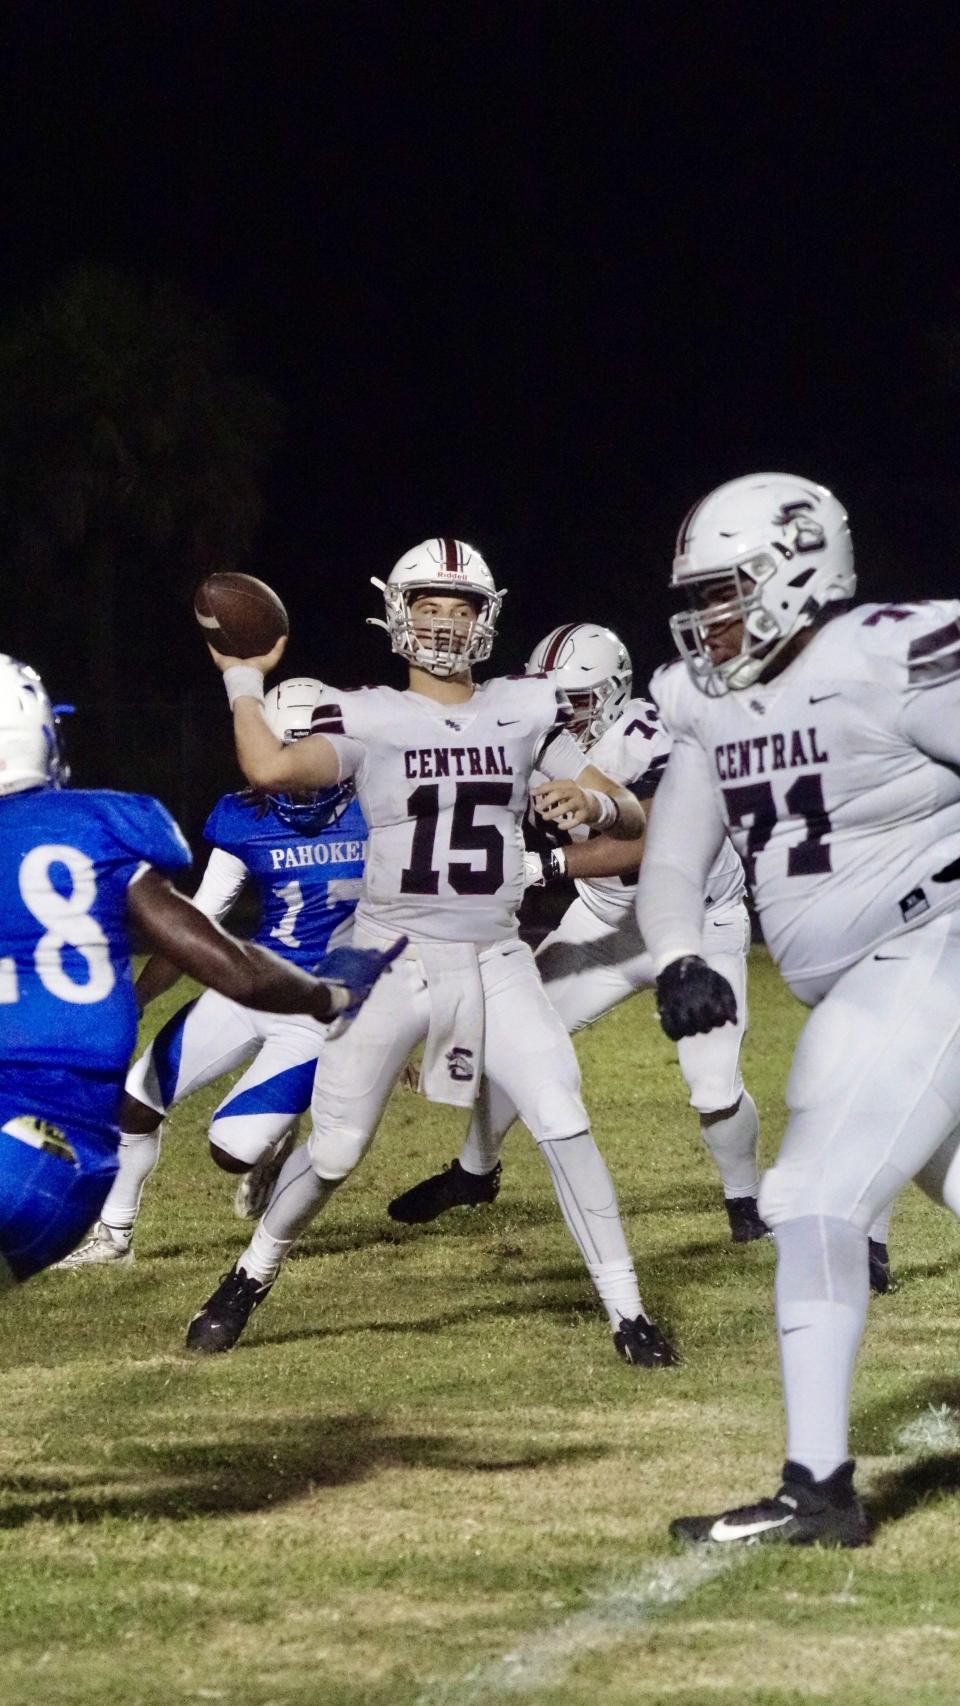 Palm Beach Central quarterback Caleb Butler (15) passes against Pahokee in a football game on Thursday, Sept. 14, 2023 in Pahokee.